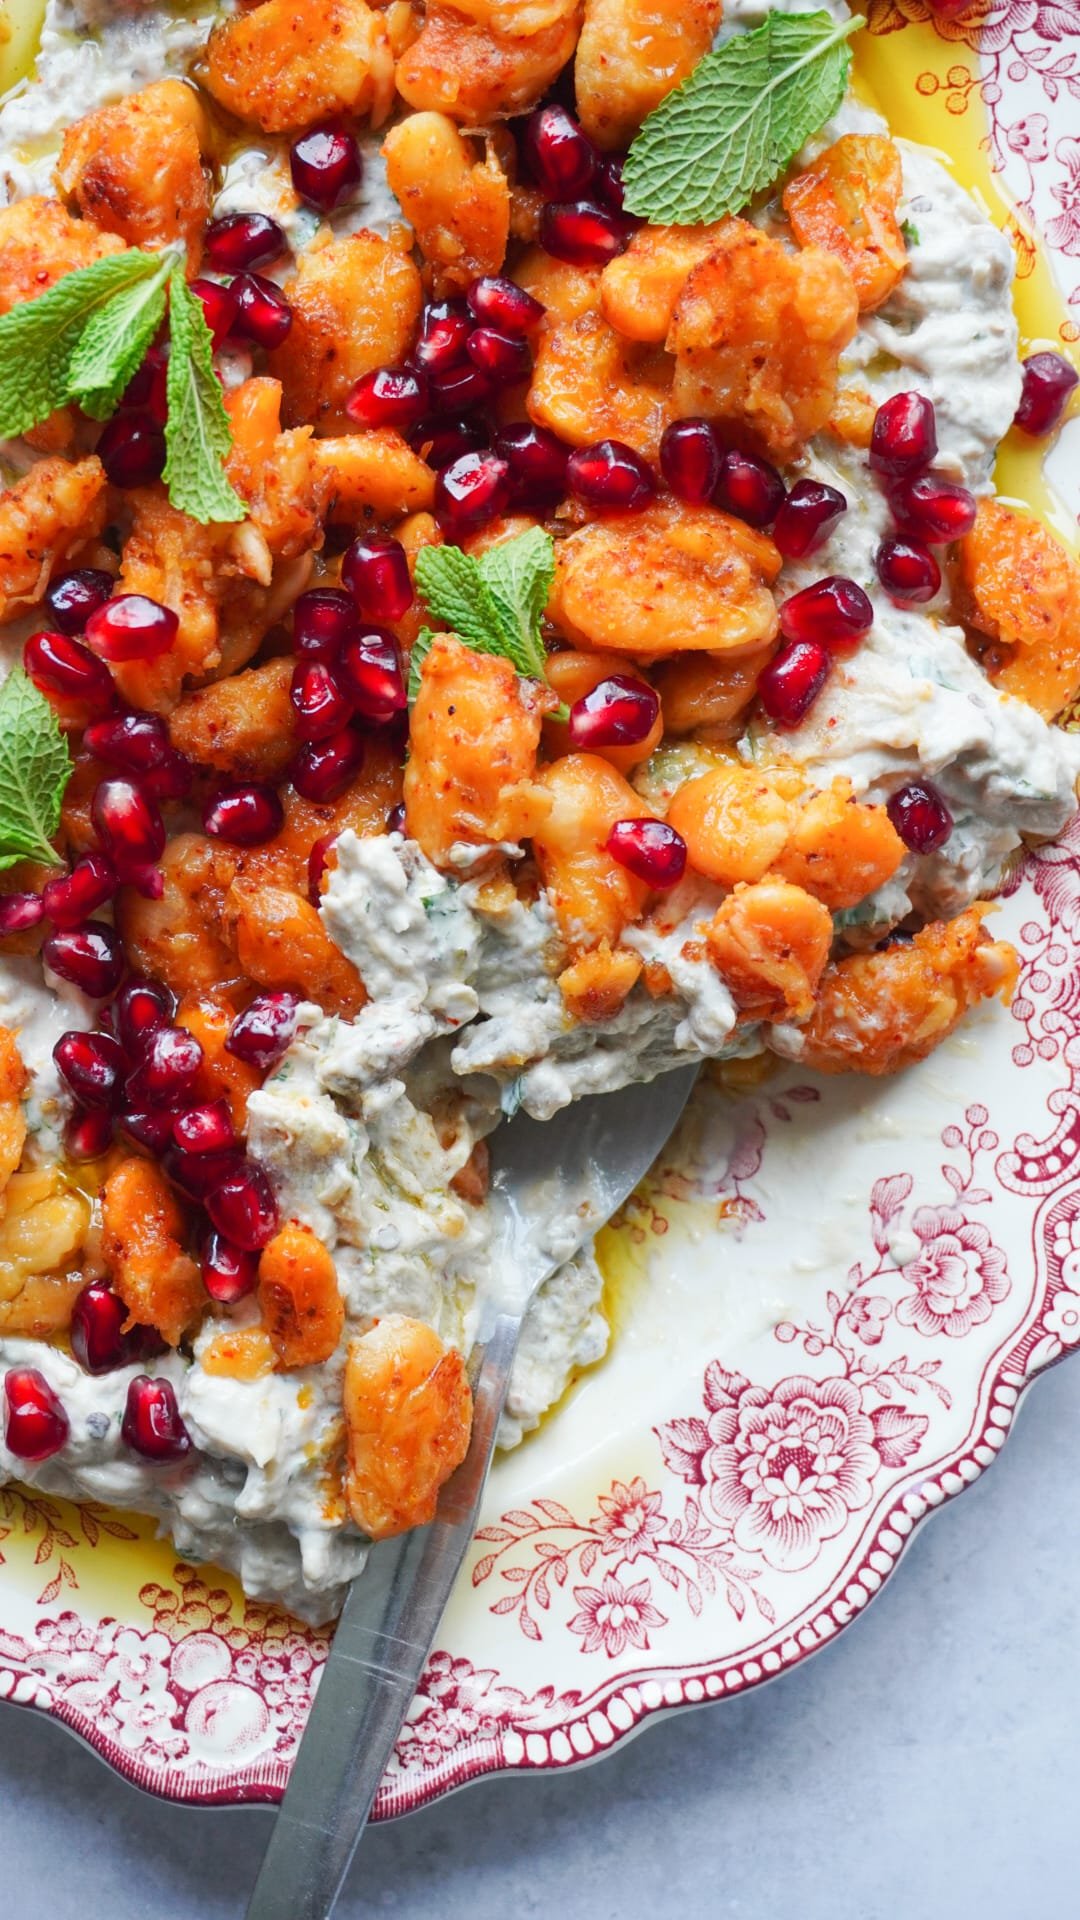 This Tahini Walnut Aubergine Dip with Crispy Butter Beans is absolutely delicious and perfectly presented with some pomegranate seeds topping.